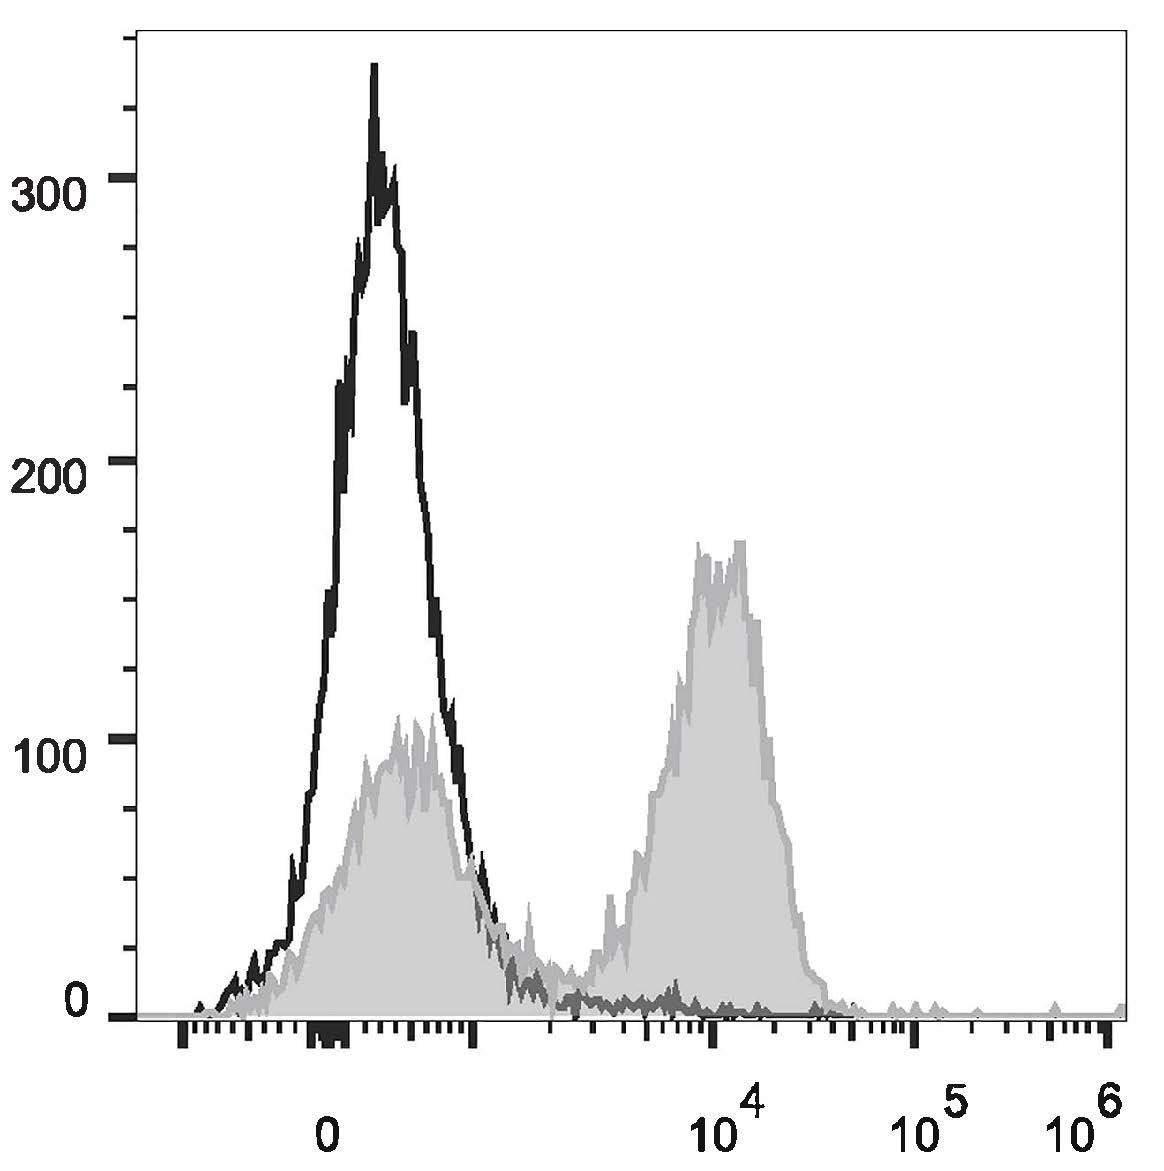 Rat splenocytes are  stained with Anti-Rat CD3 Monoclonal Antibody(PerCP/Cyanine5.5 Conjugated)[Used at 0.05 μg/10<sup>6</sup> cells dilution](filled gray histogram). Unstained splenocytes (empty black histogram) are used as control.